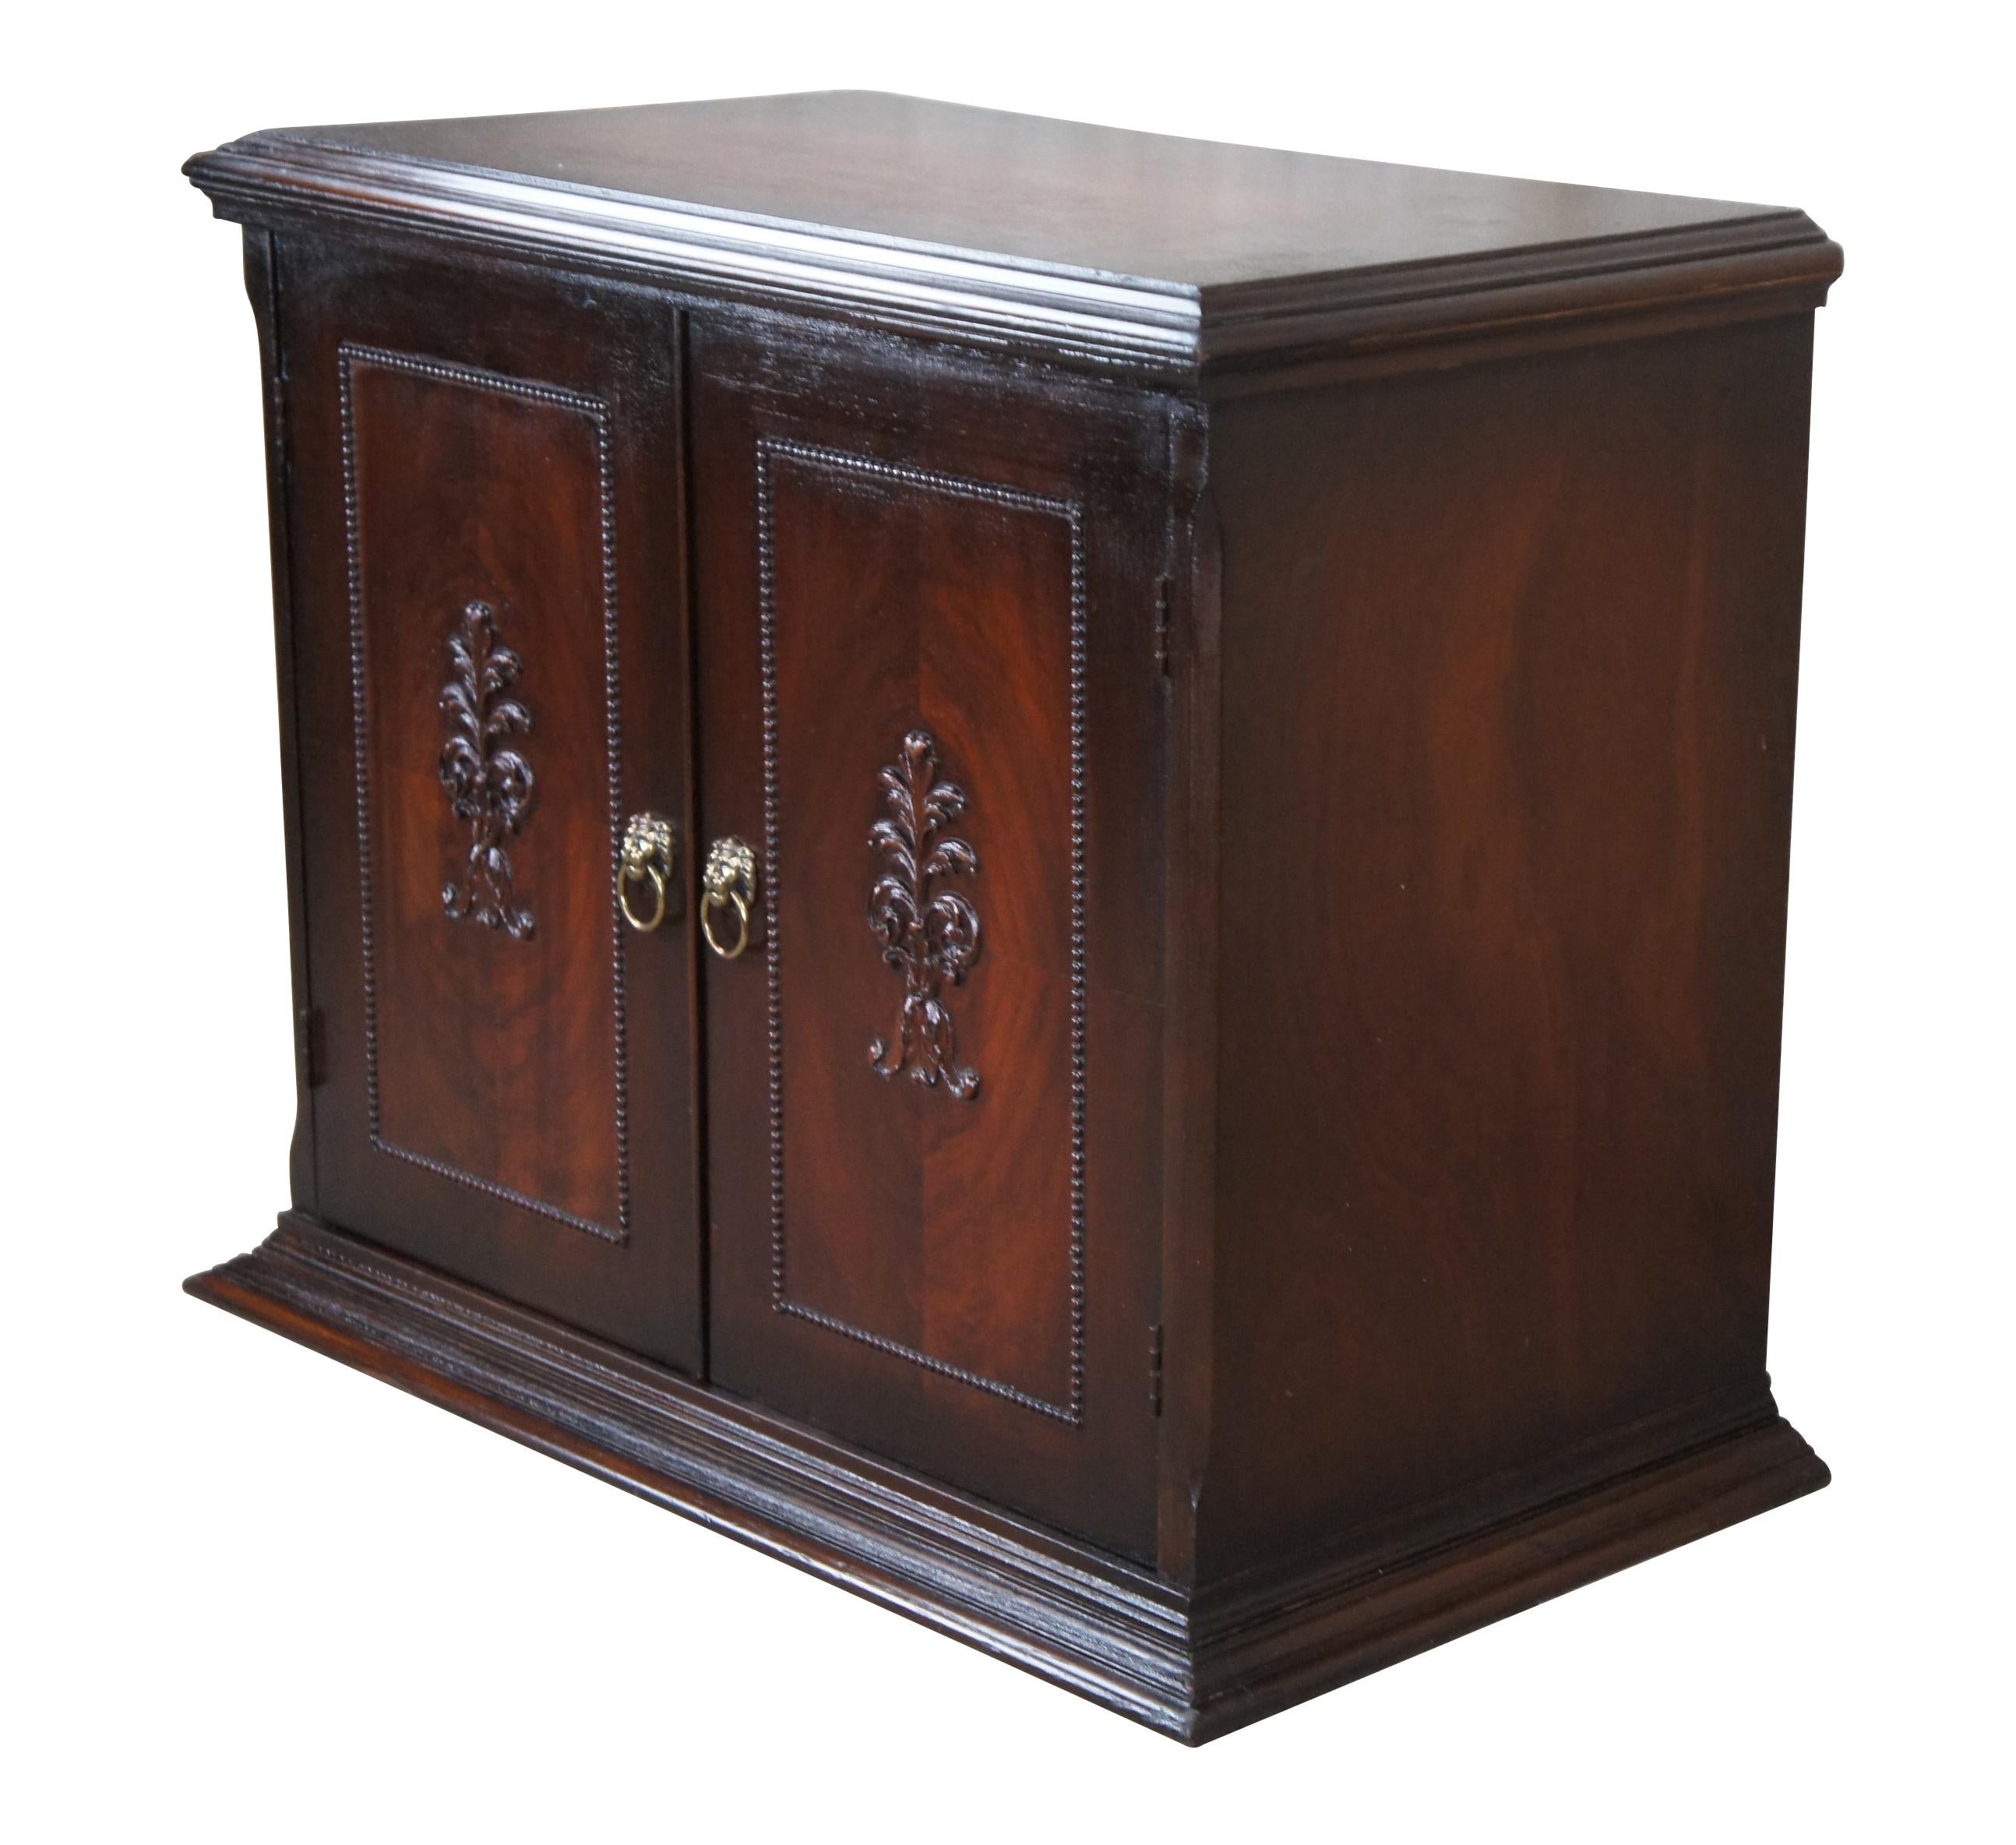 1940s vintage 2 door cabinet.  Made from walnut with matchbook doors featuring beaded trim and acanthus carved center.  The cabinet opens via lion head knocker pulls to a storage area with s helf.  Vented along back left.  This cabinet was